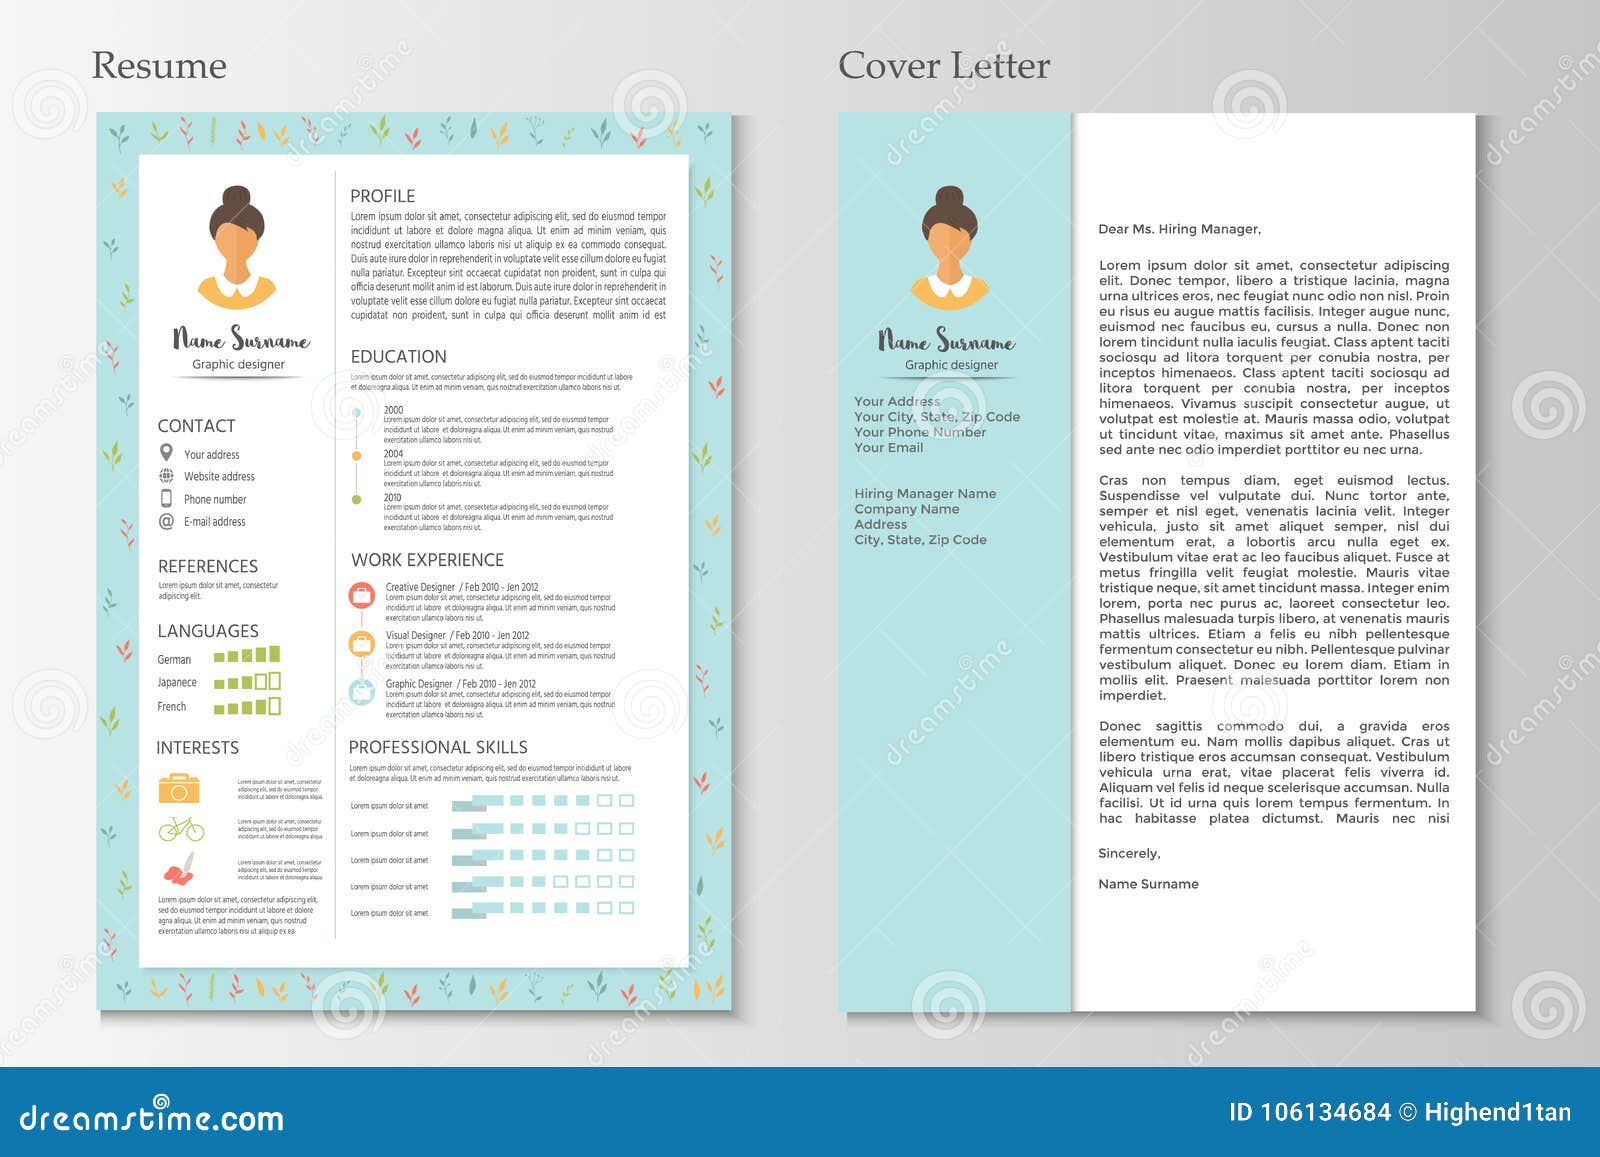 3 Guilt Free Resume writing services Tips